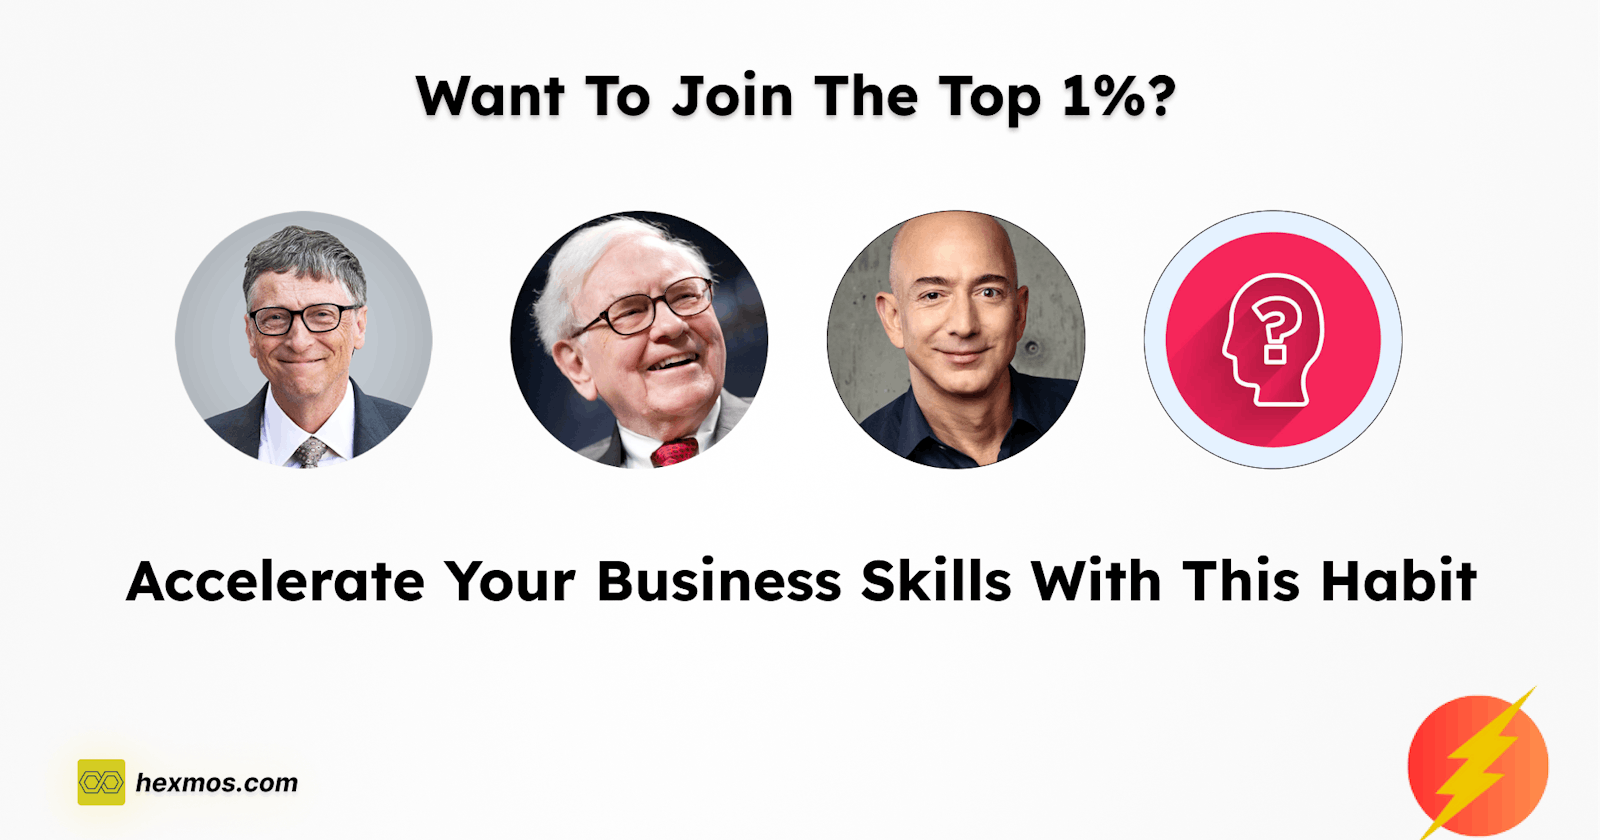 Want to Join the Top 1%? Accelerate Your Business Skills with This Habit